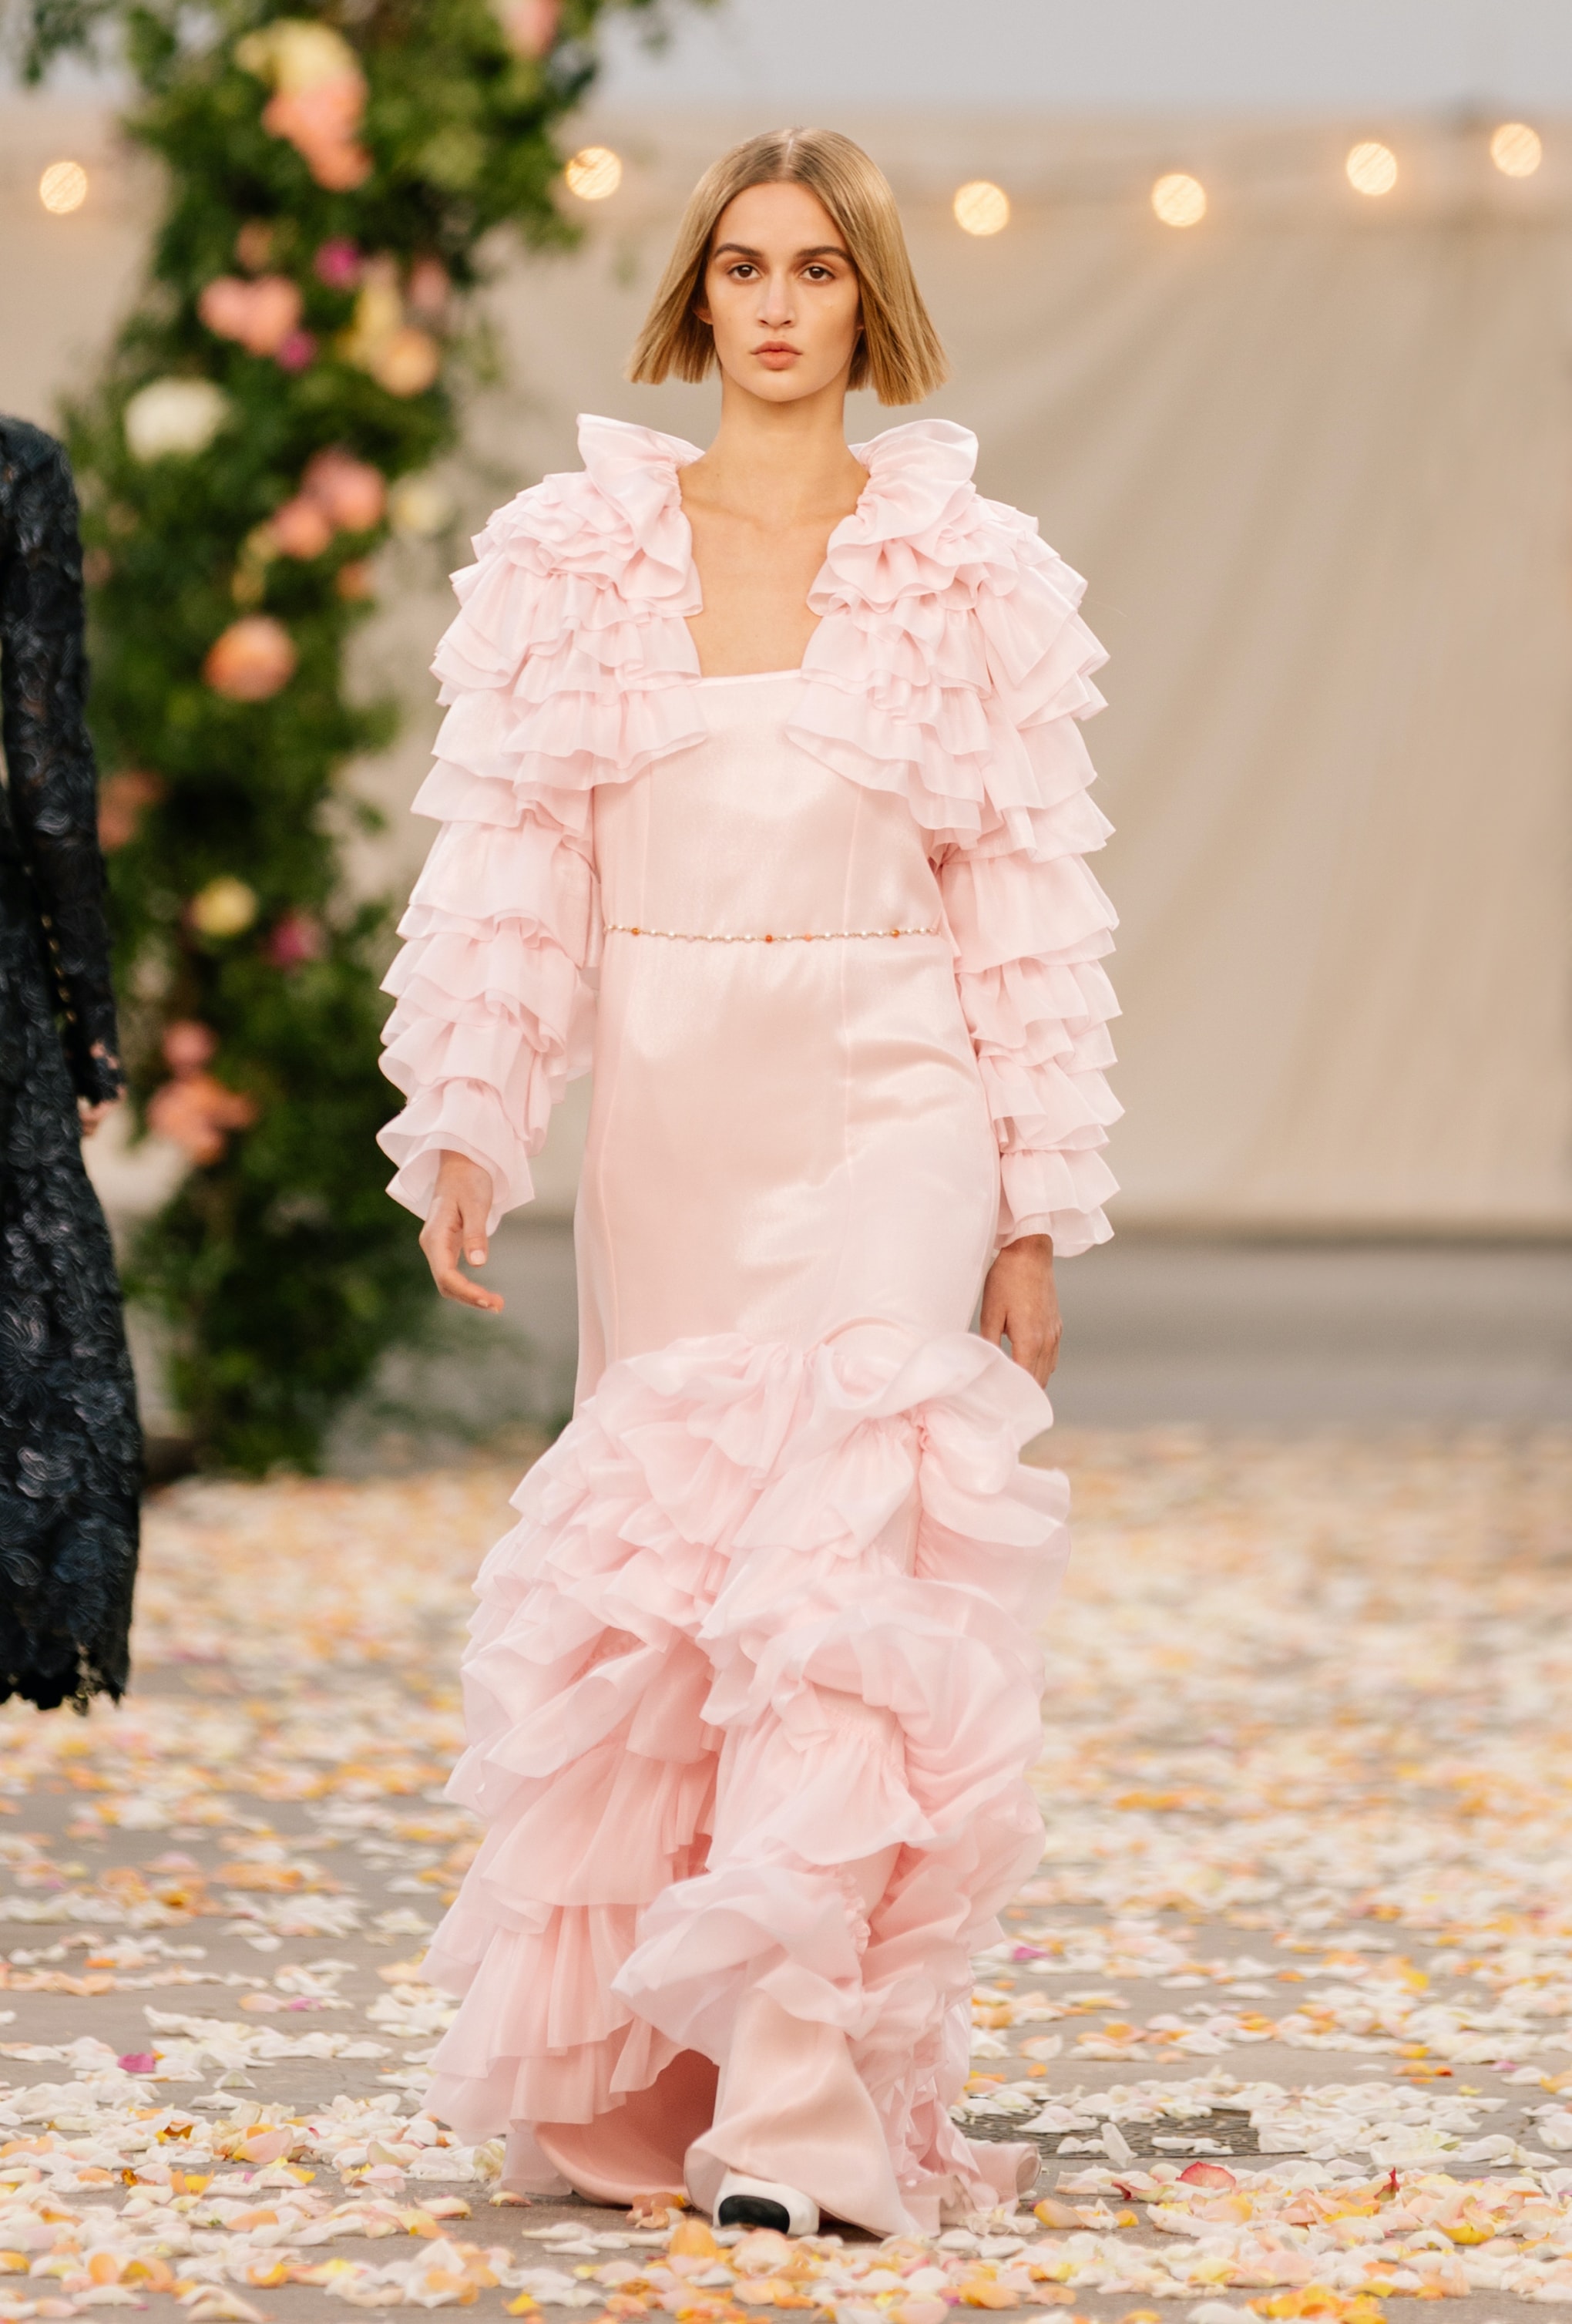 Chanel SS2021 haute couture collection Virginie Viard